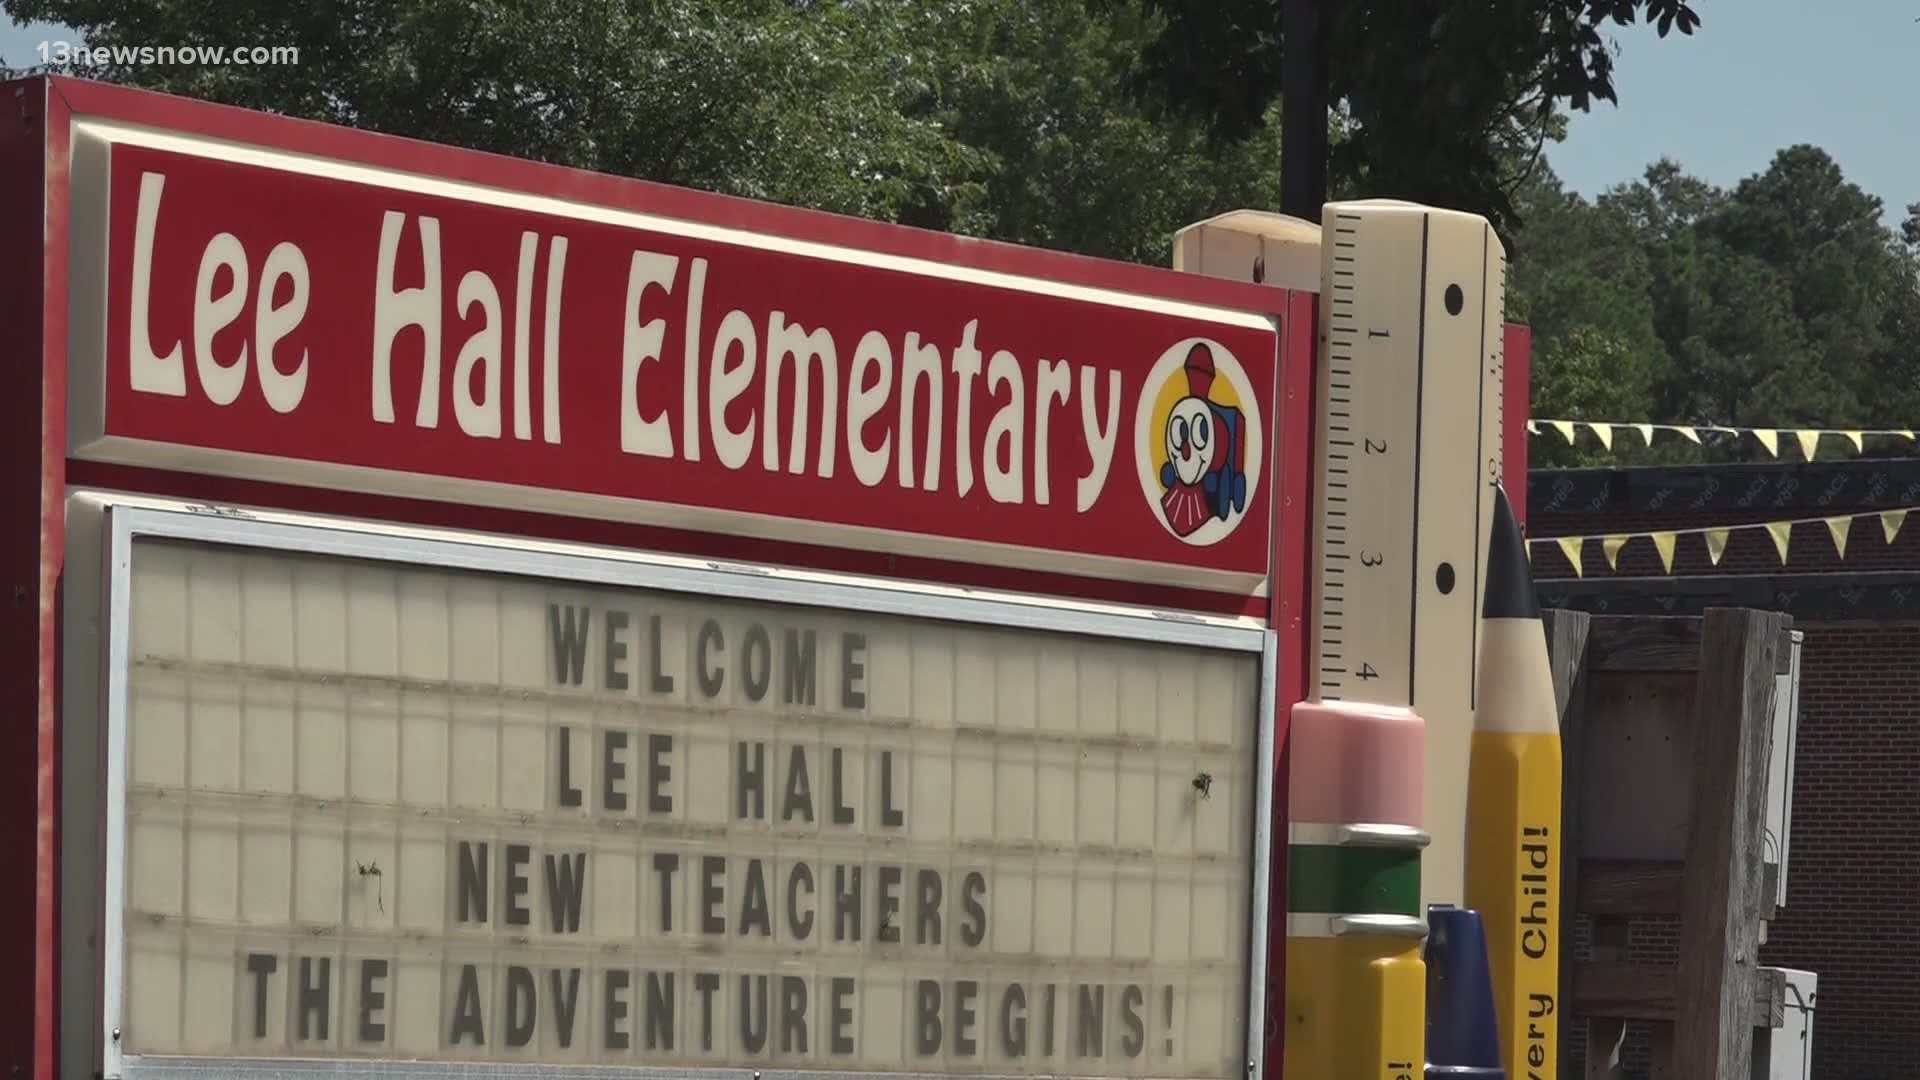 Newport News Public Schools is considering renaming several of its schools. The superintendent says some names do not reflect the current values of the division.